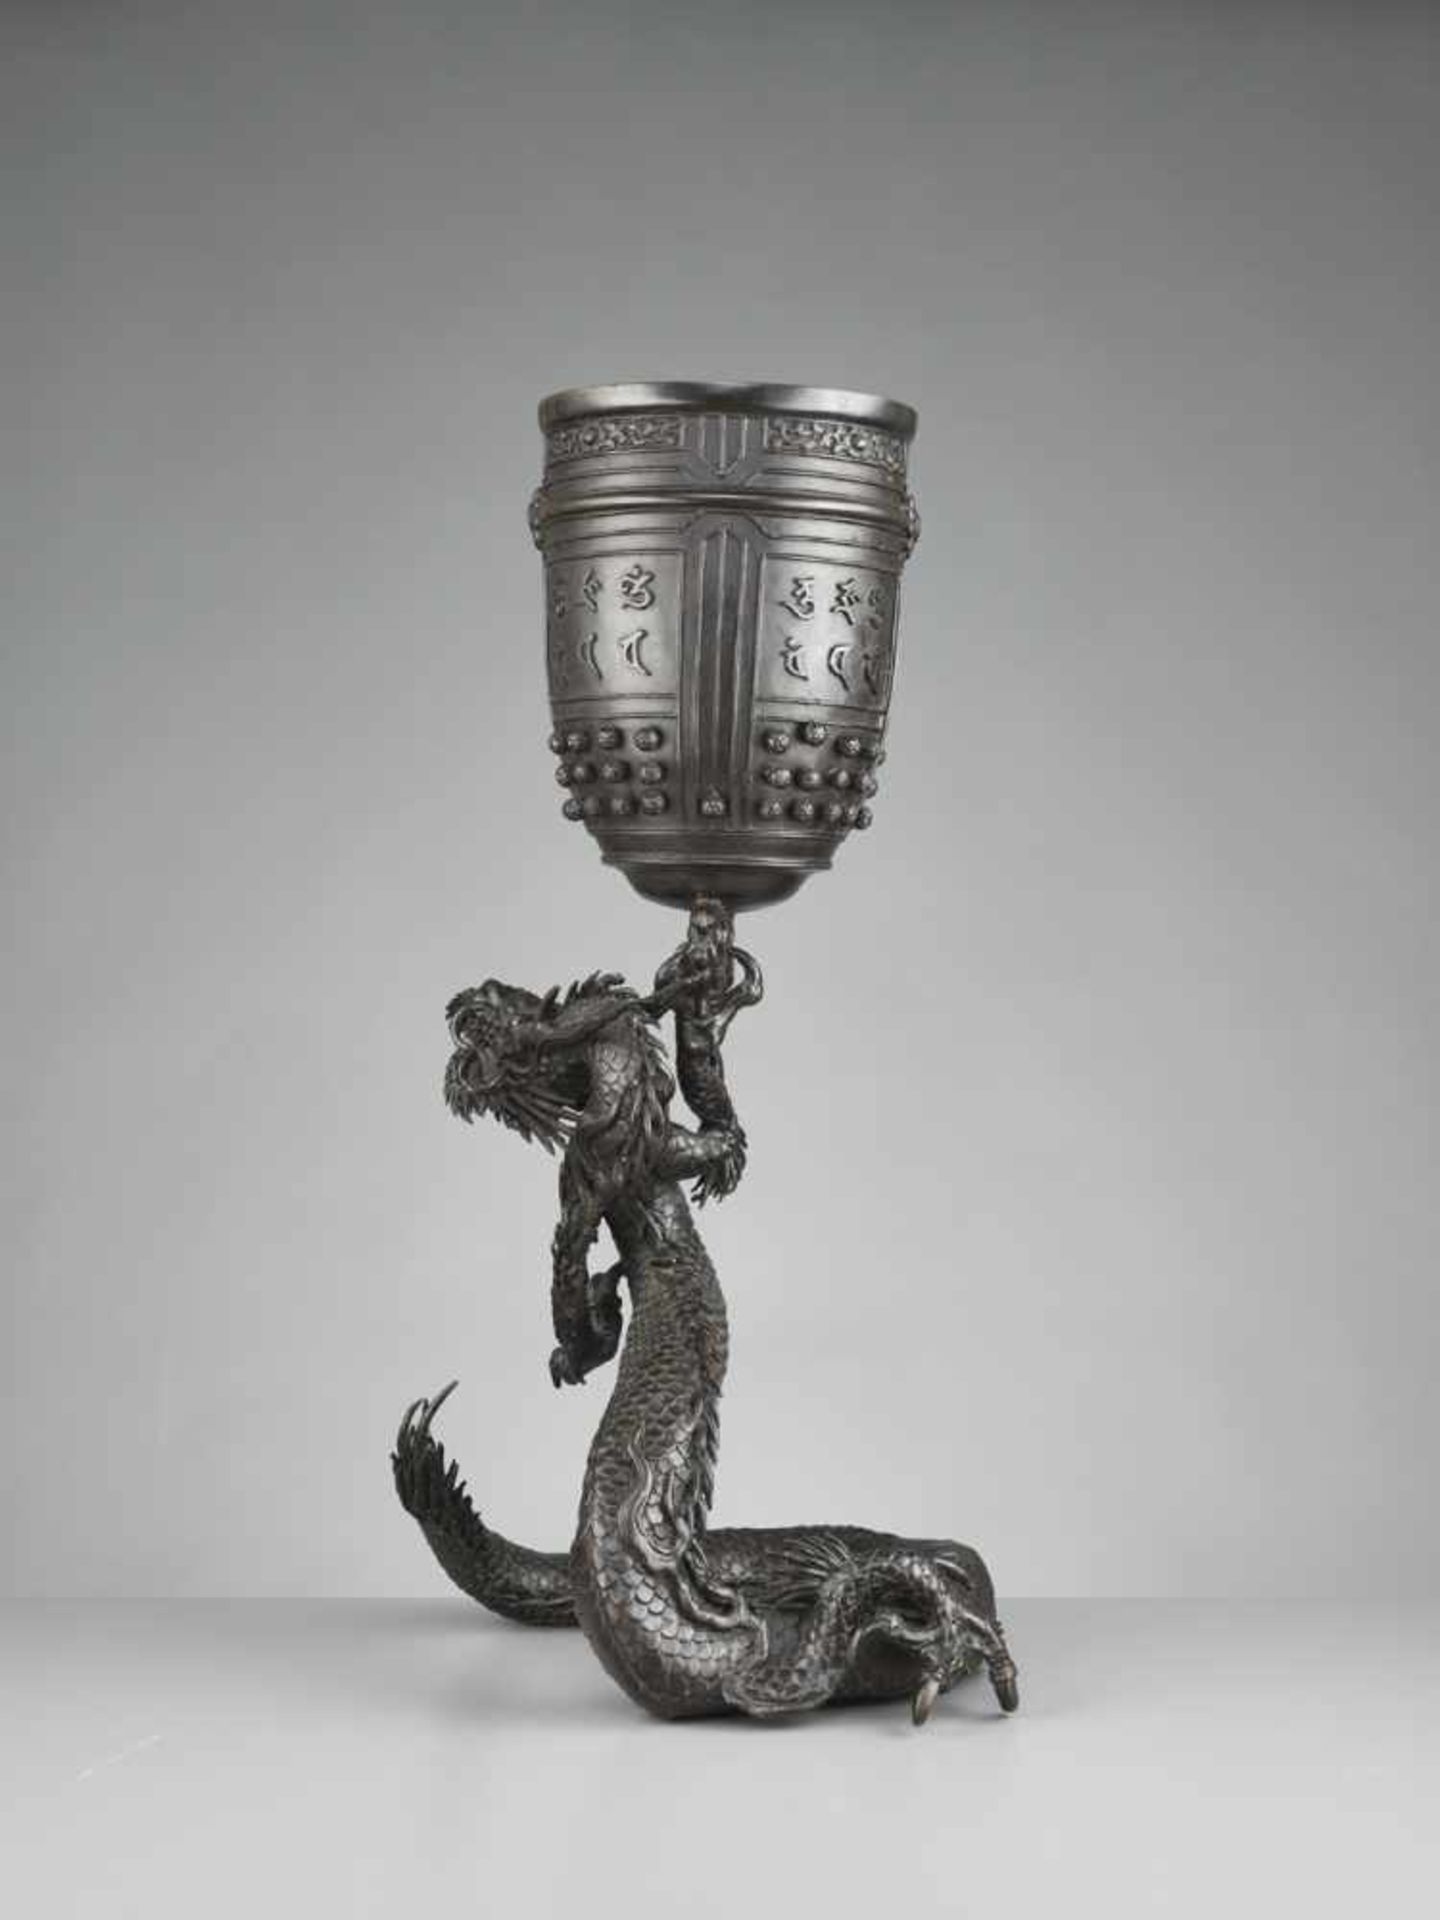 A LARGE AND MASSIVE DRAGON AND TEMPLE BELL BRONZE Japan, 19th century, late Edo period (1615-1868) - Image 5 of 10